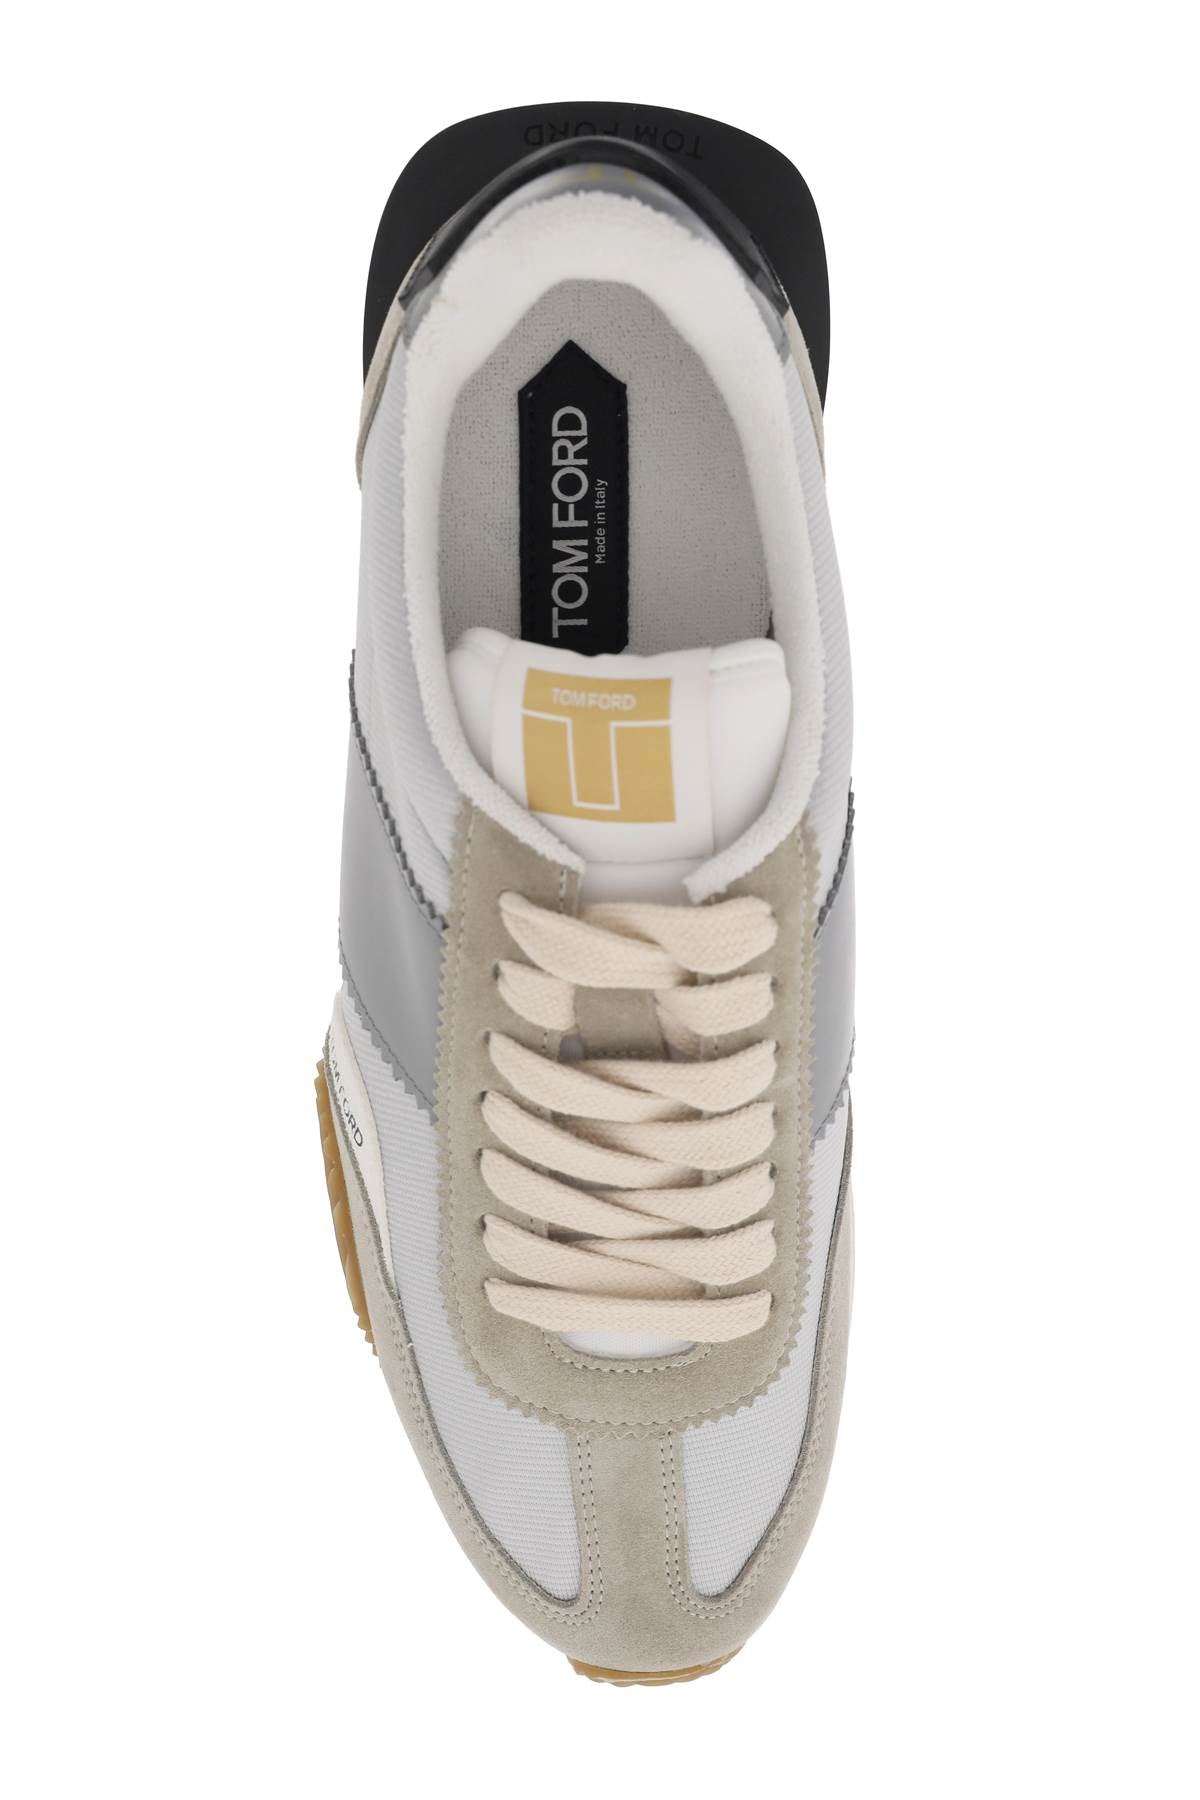 Tom ford james sneakers in lycra and suede leather-1